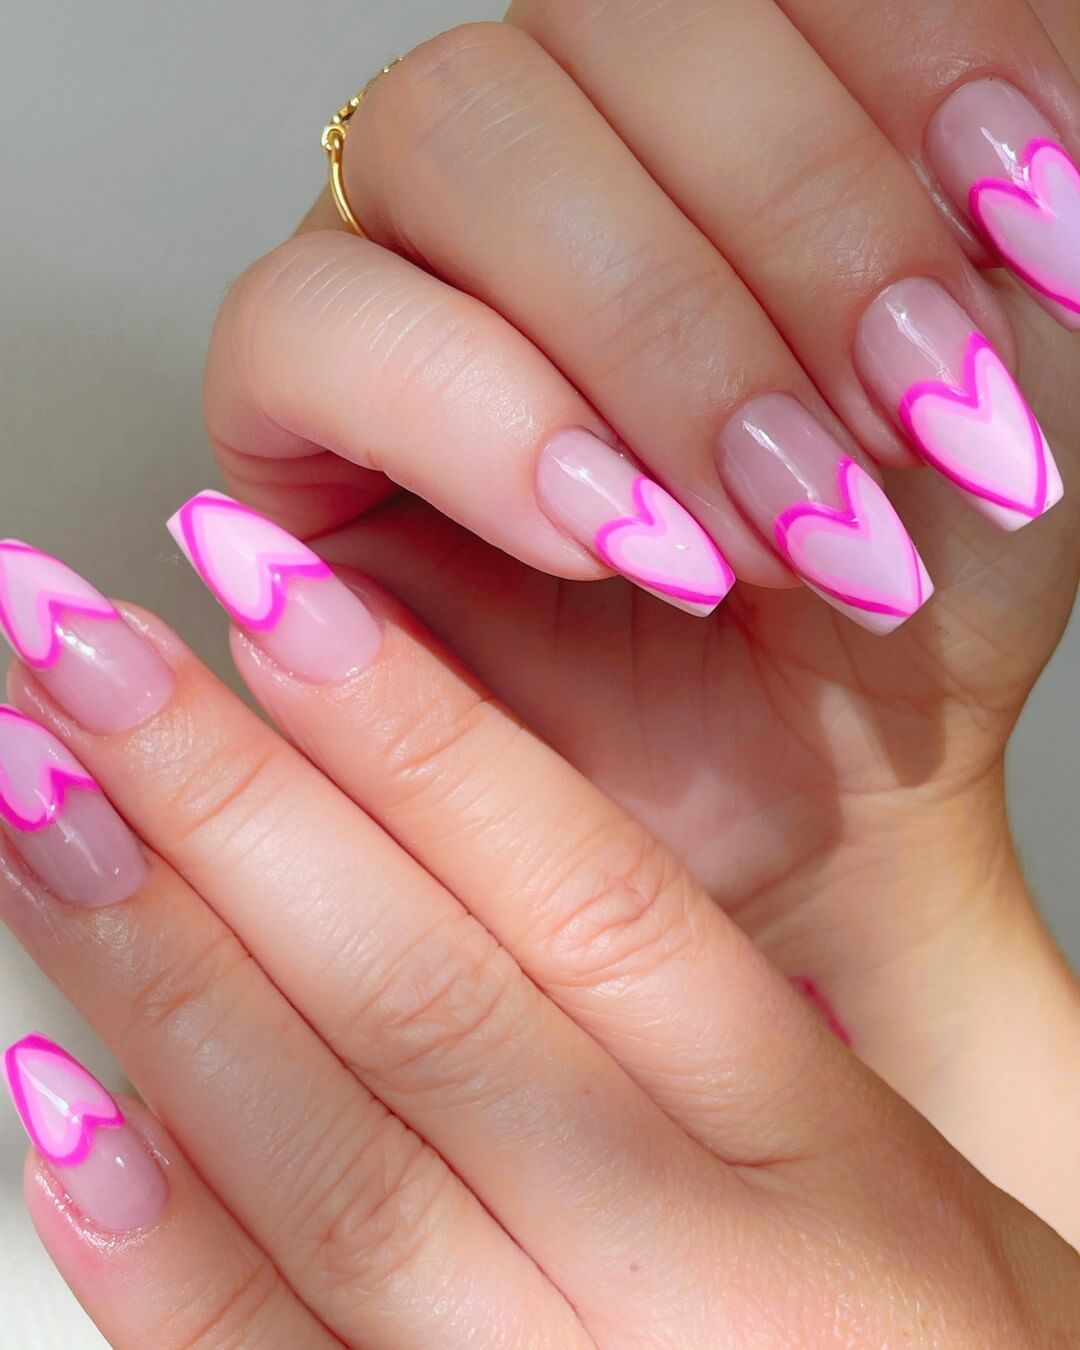 Heart Nail Art Designs Let the heart design be at the top